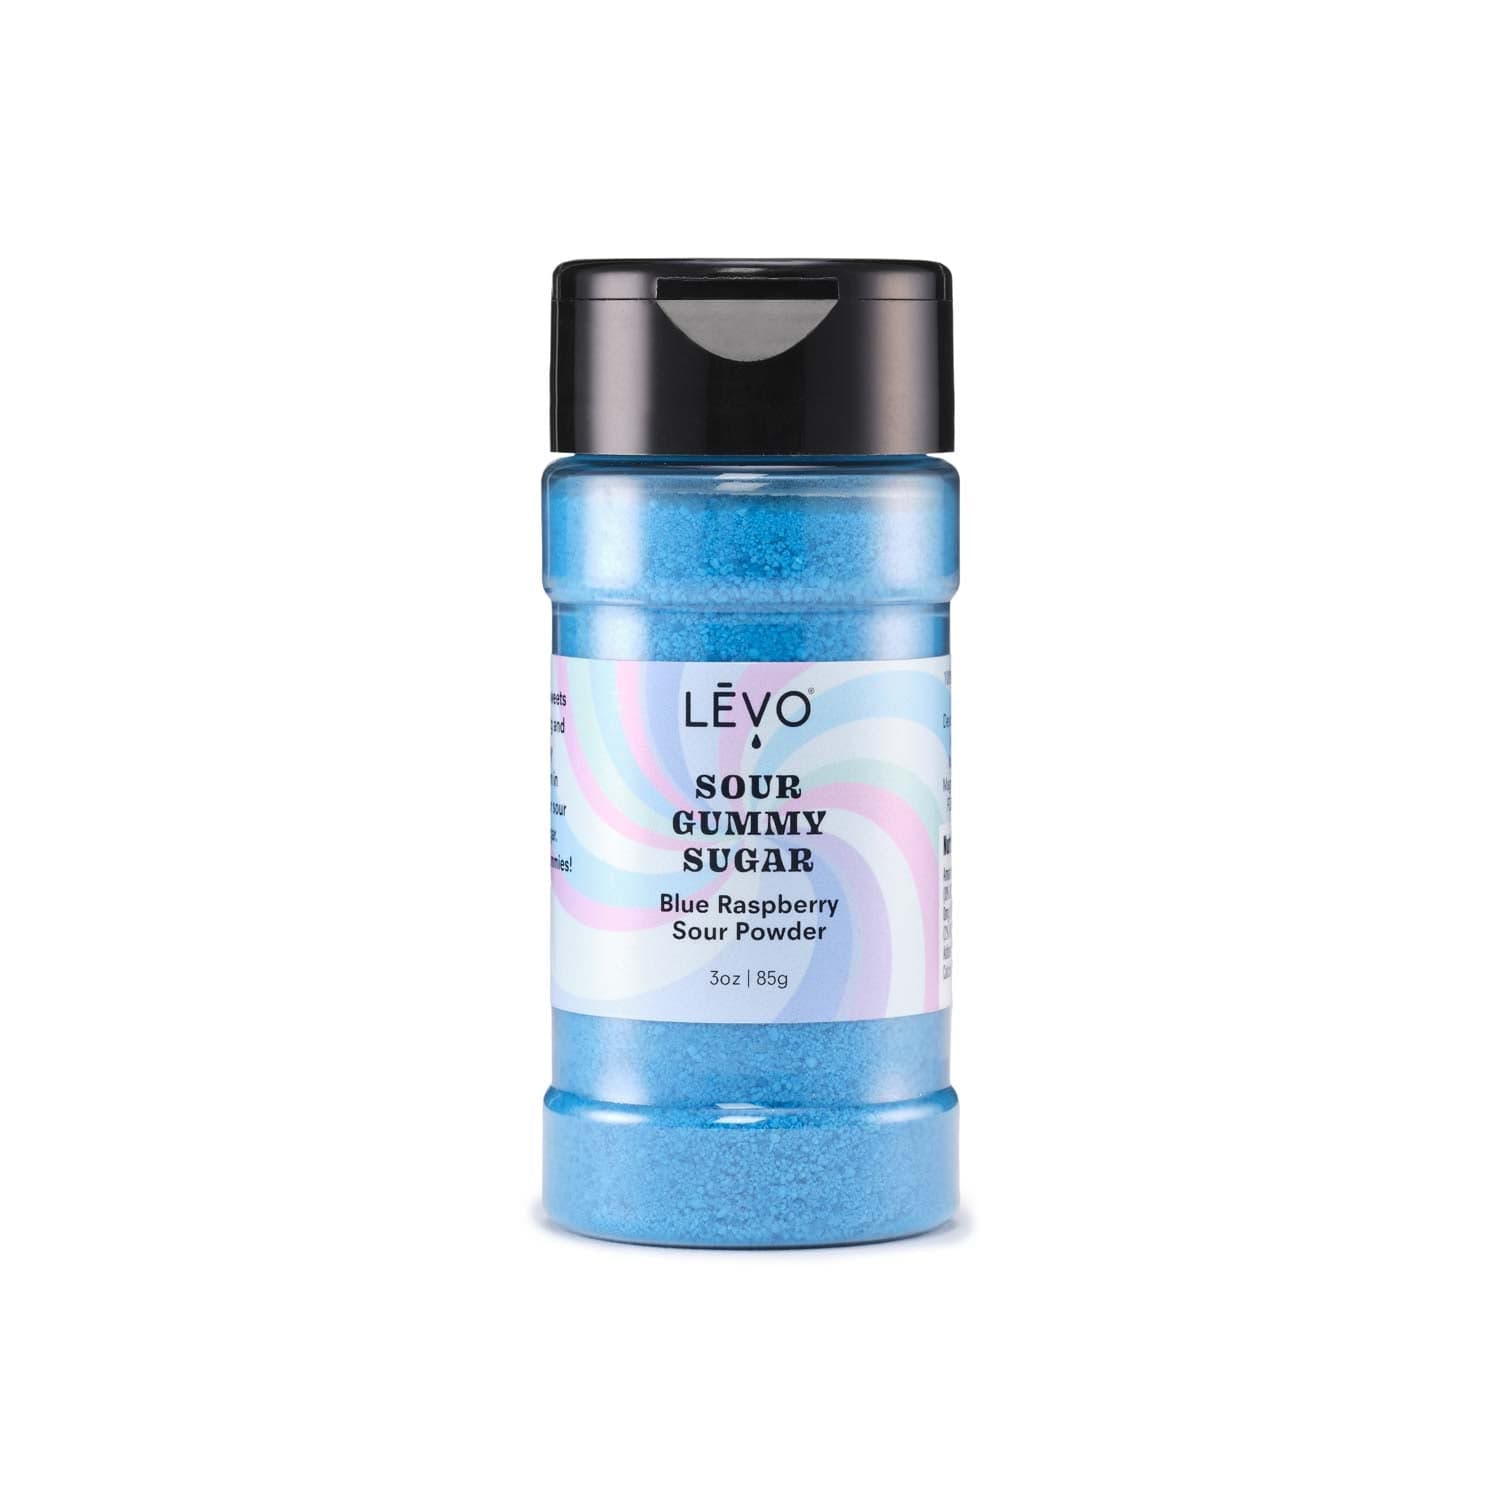 LEVO sour gummy sugar in blue raspberry sour powder. Create stunning and flavorful gummies with the Gummy Decorating Kit including Edible Glitter, Shimmer, and Sour Sugars.